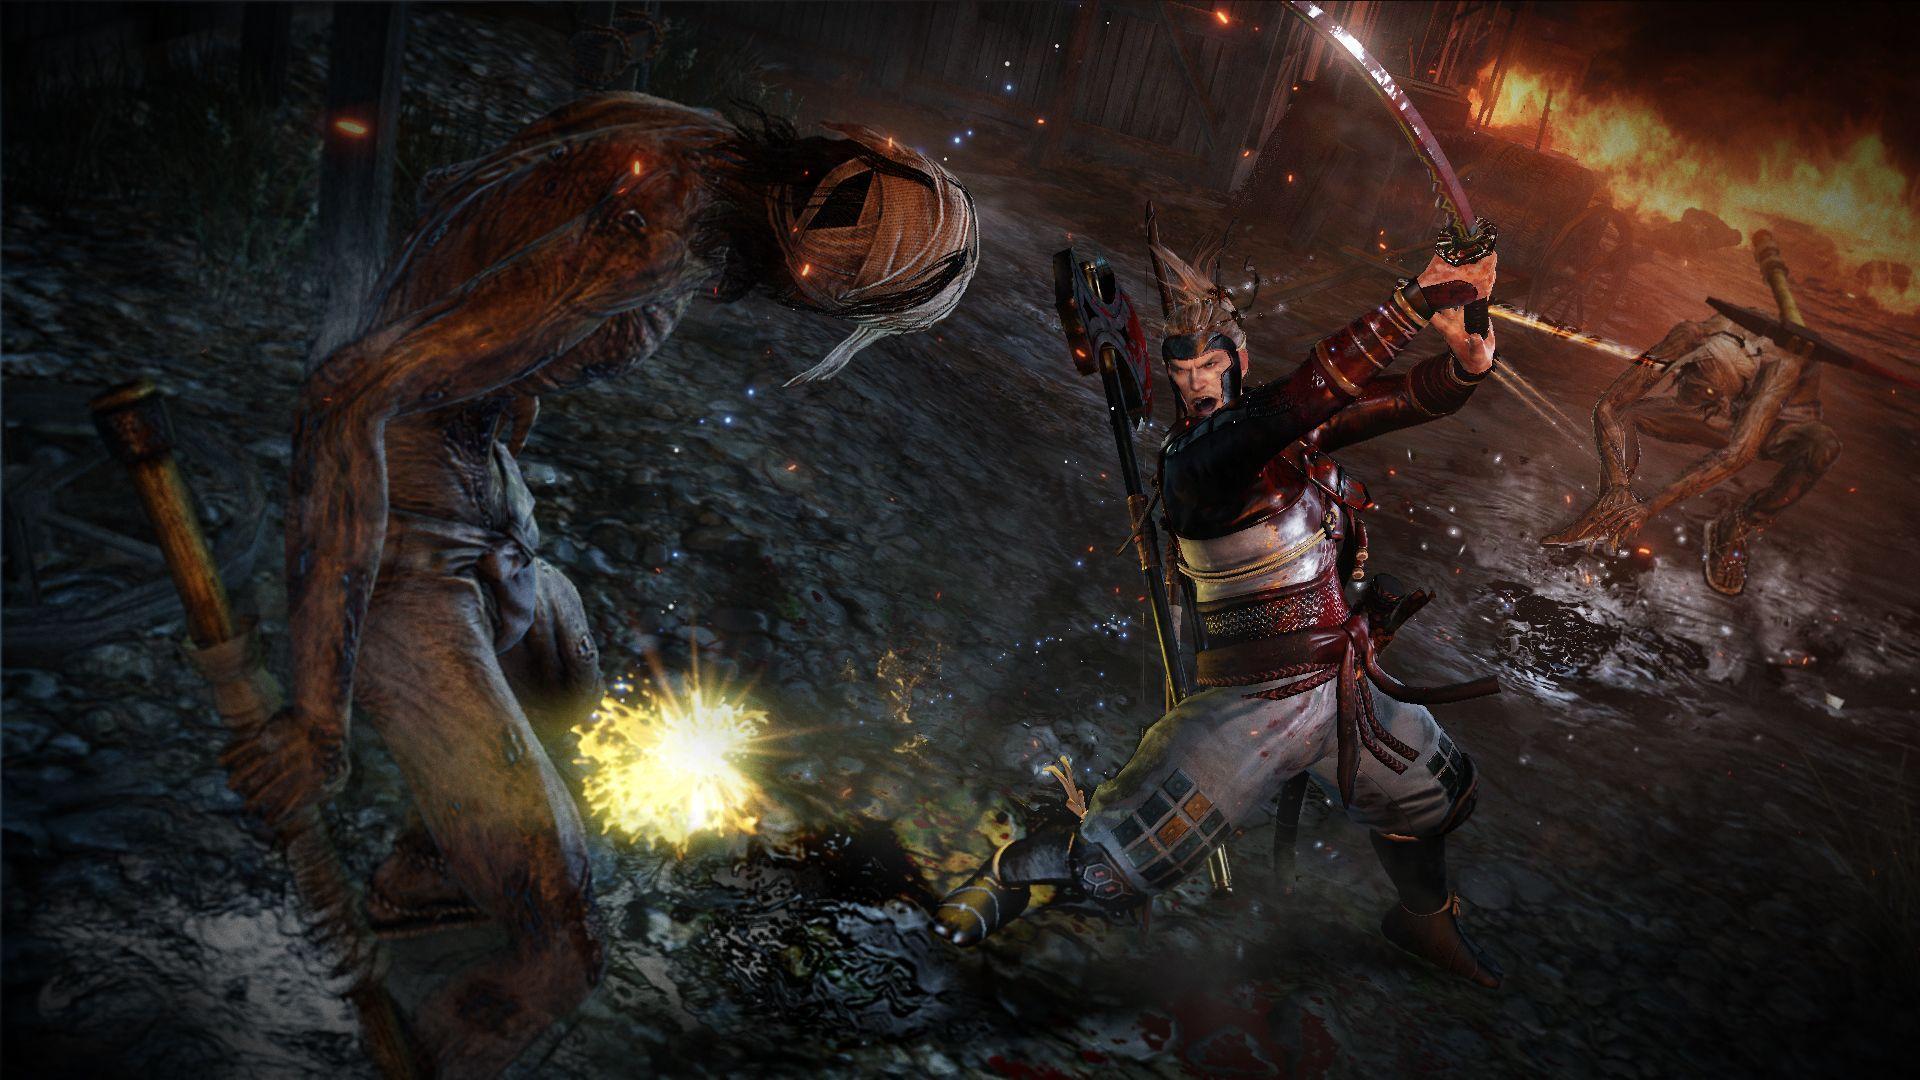 PS4 Exclusive NiOh Gets New Official 1080p Screenshots and Info to